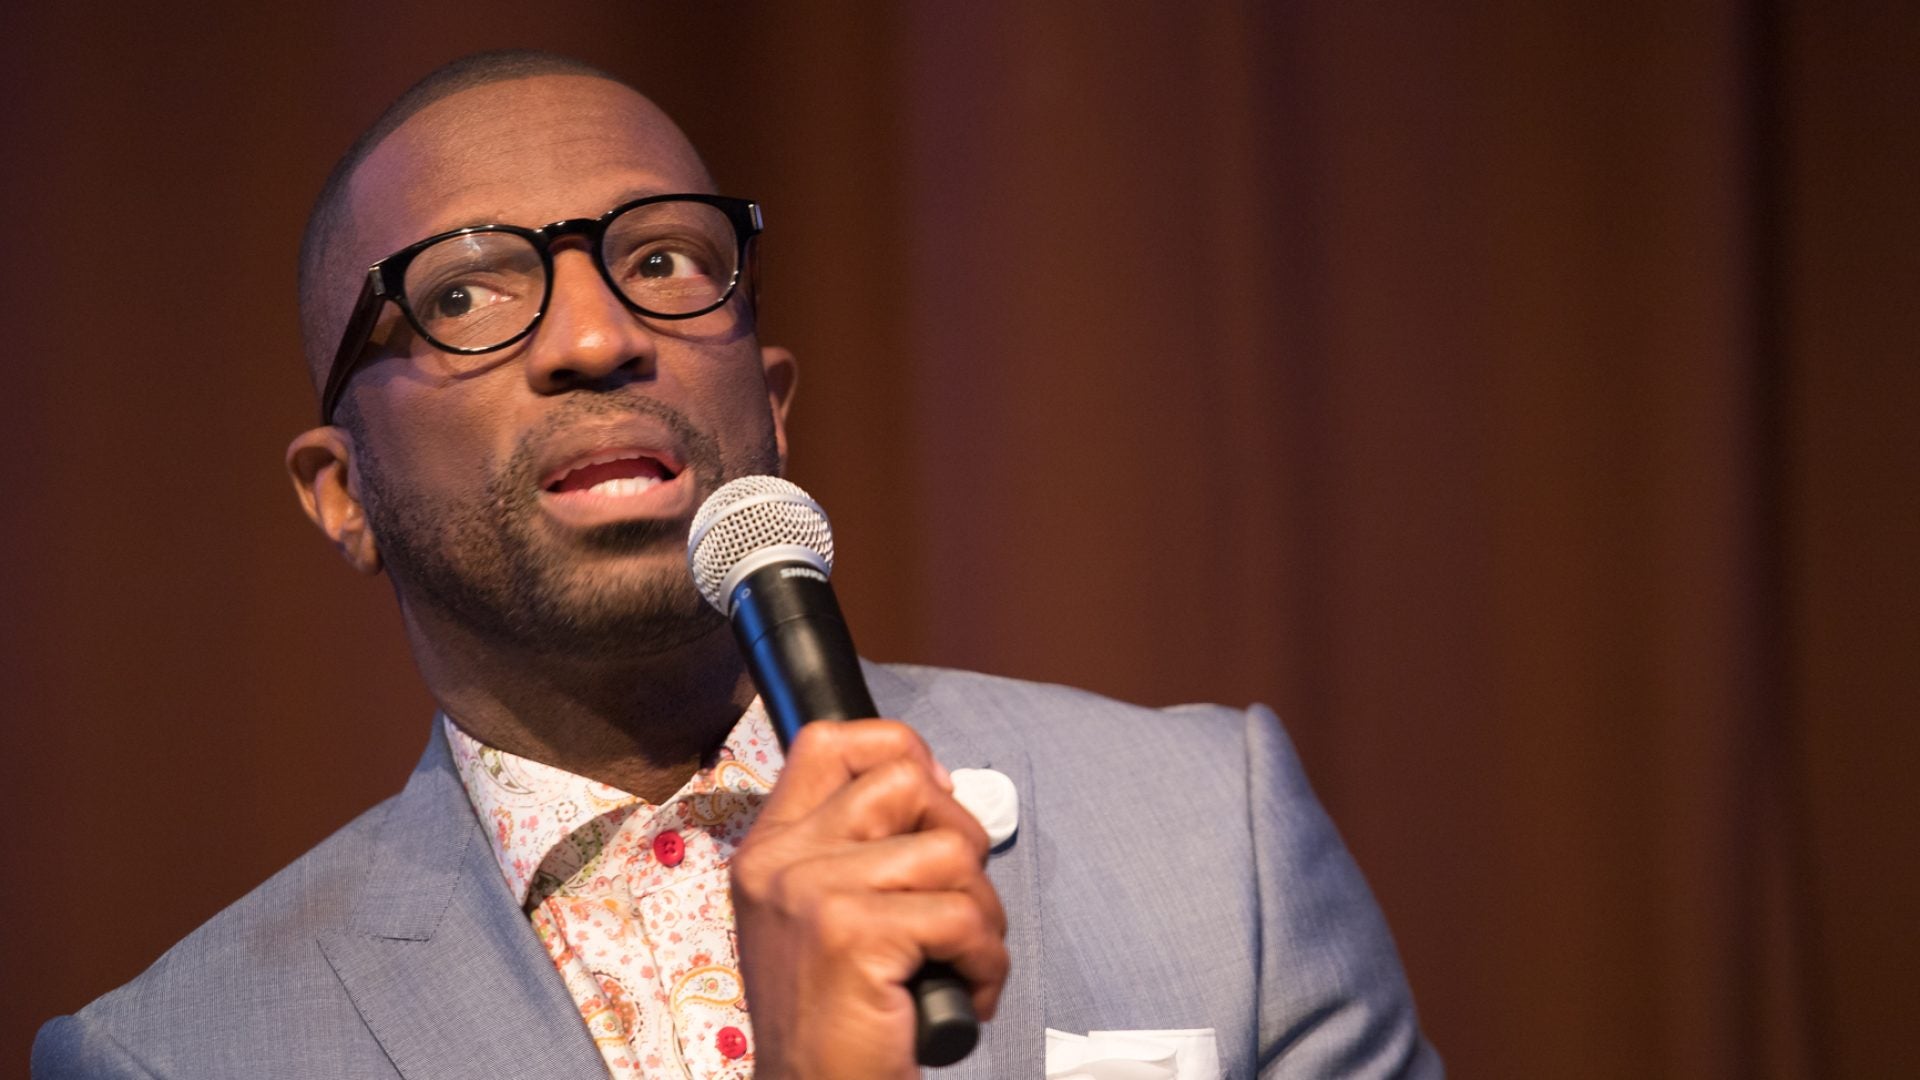 Rickey Smiley Shares His Grieving Process A Year After His Son’s Death